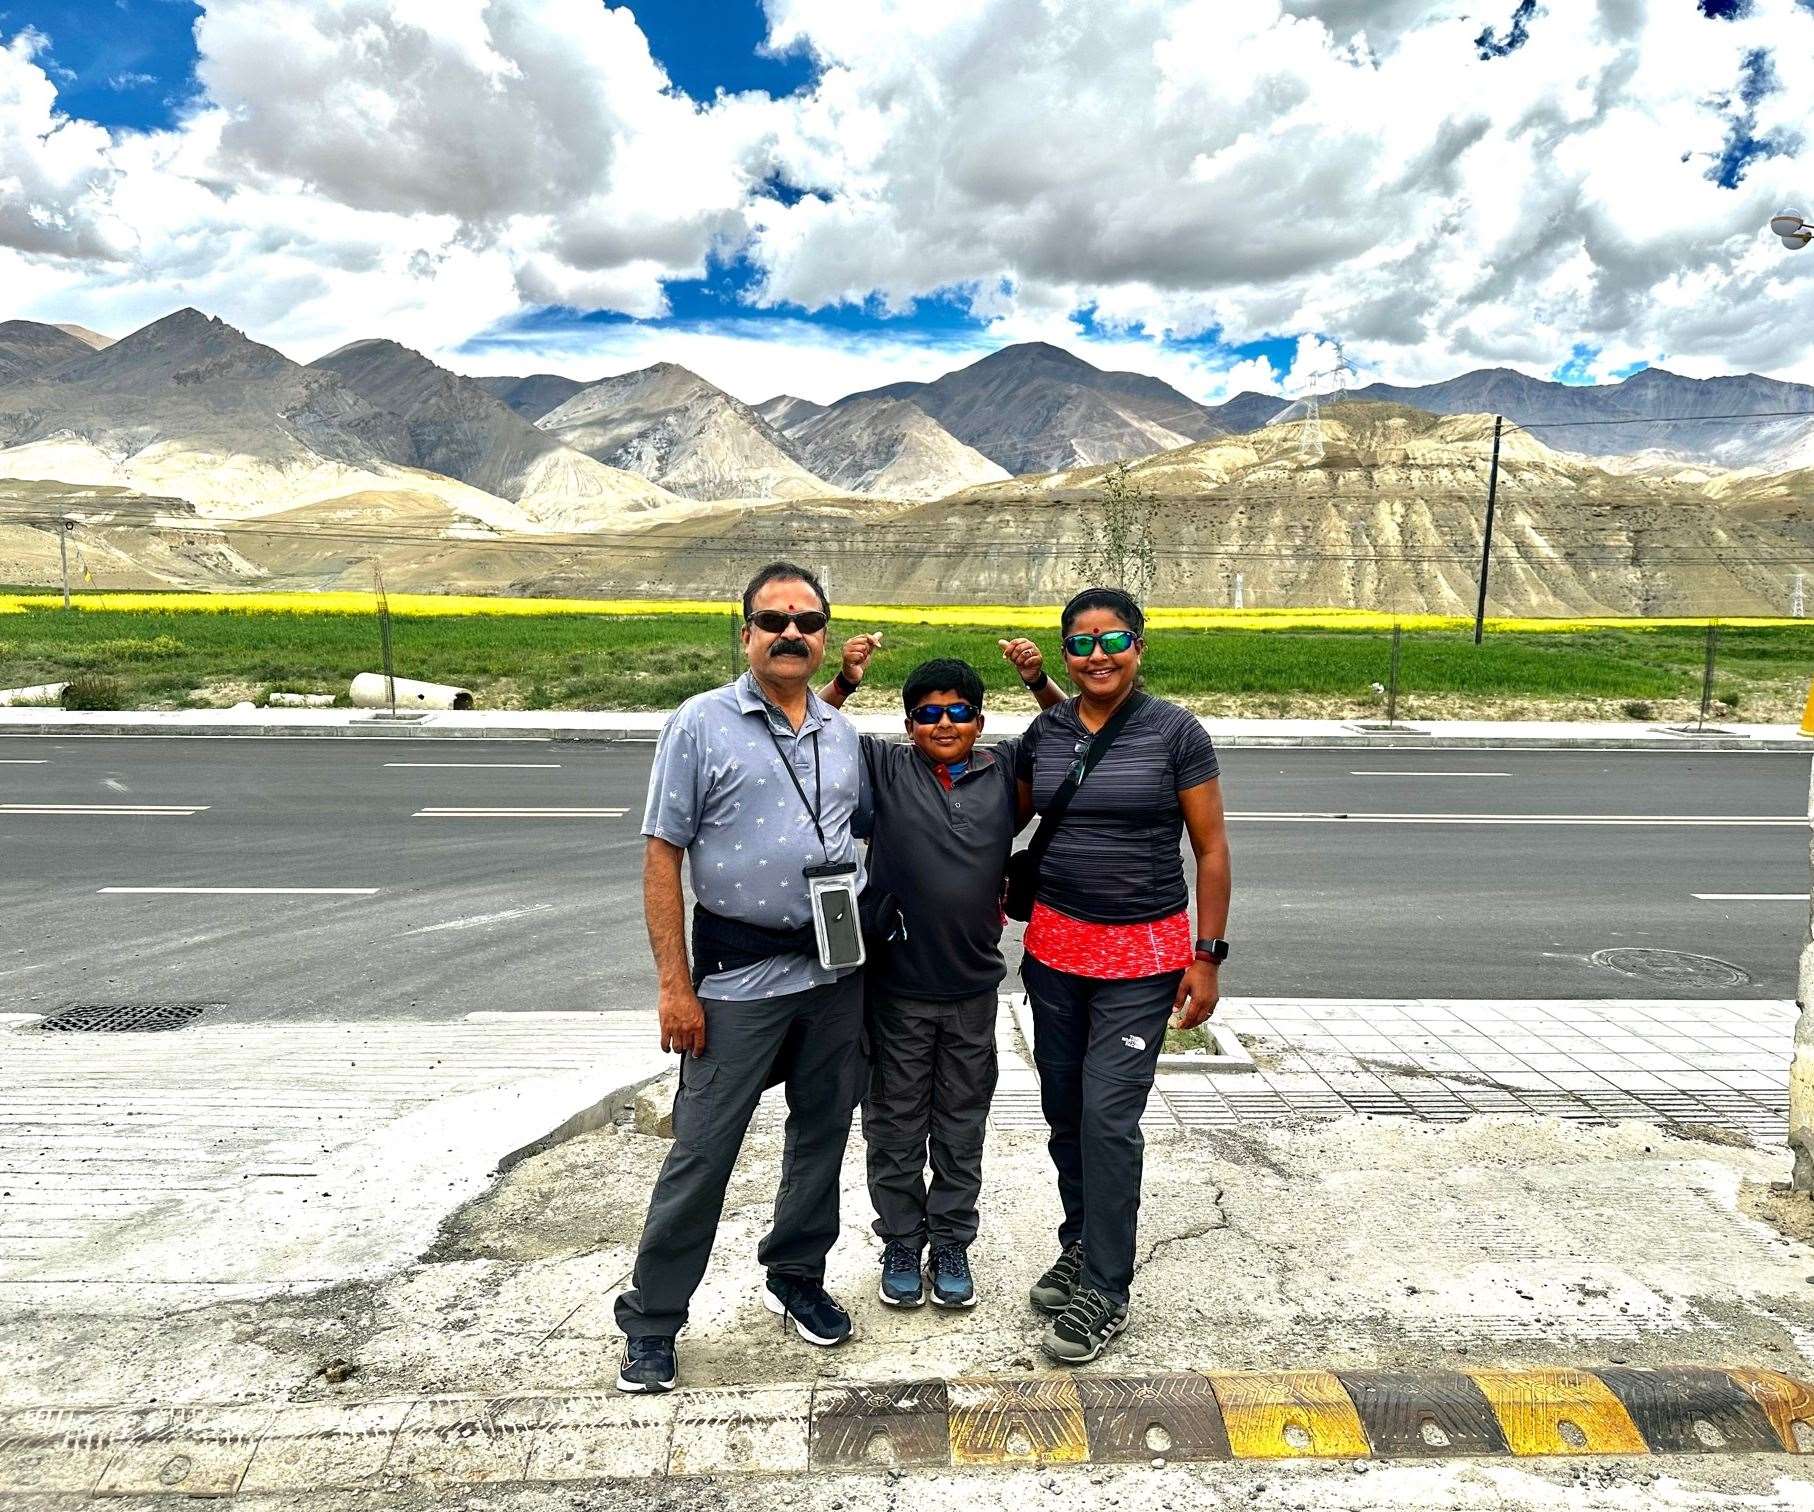 Dr Athmaja Thottungal completed the trek with her family 18 months after her second Covid infection. Picture: East Kent Hospitals University NHS Foundation Trust